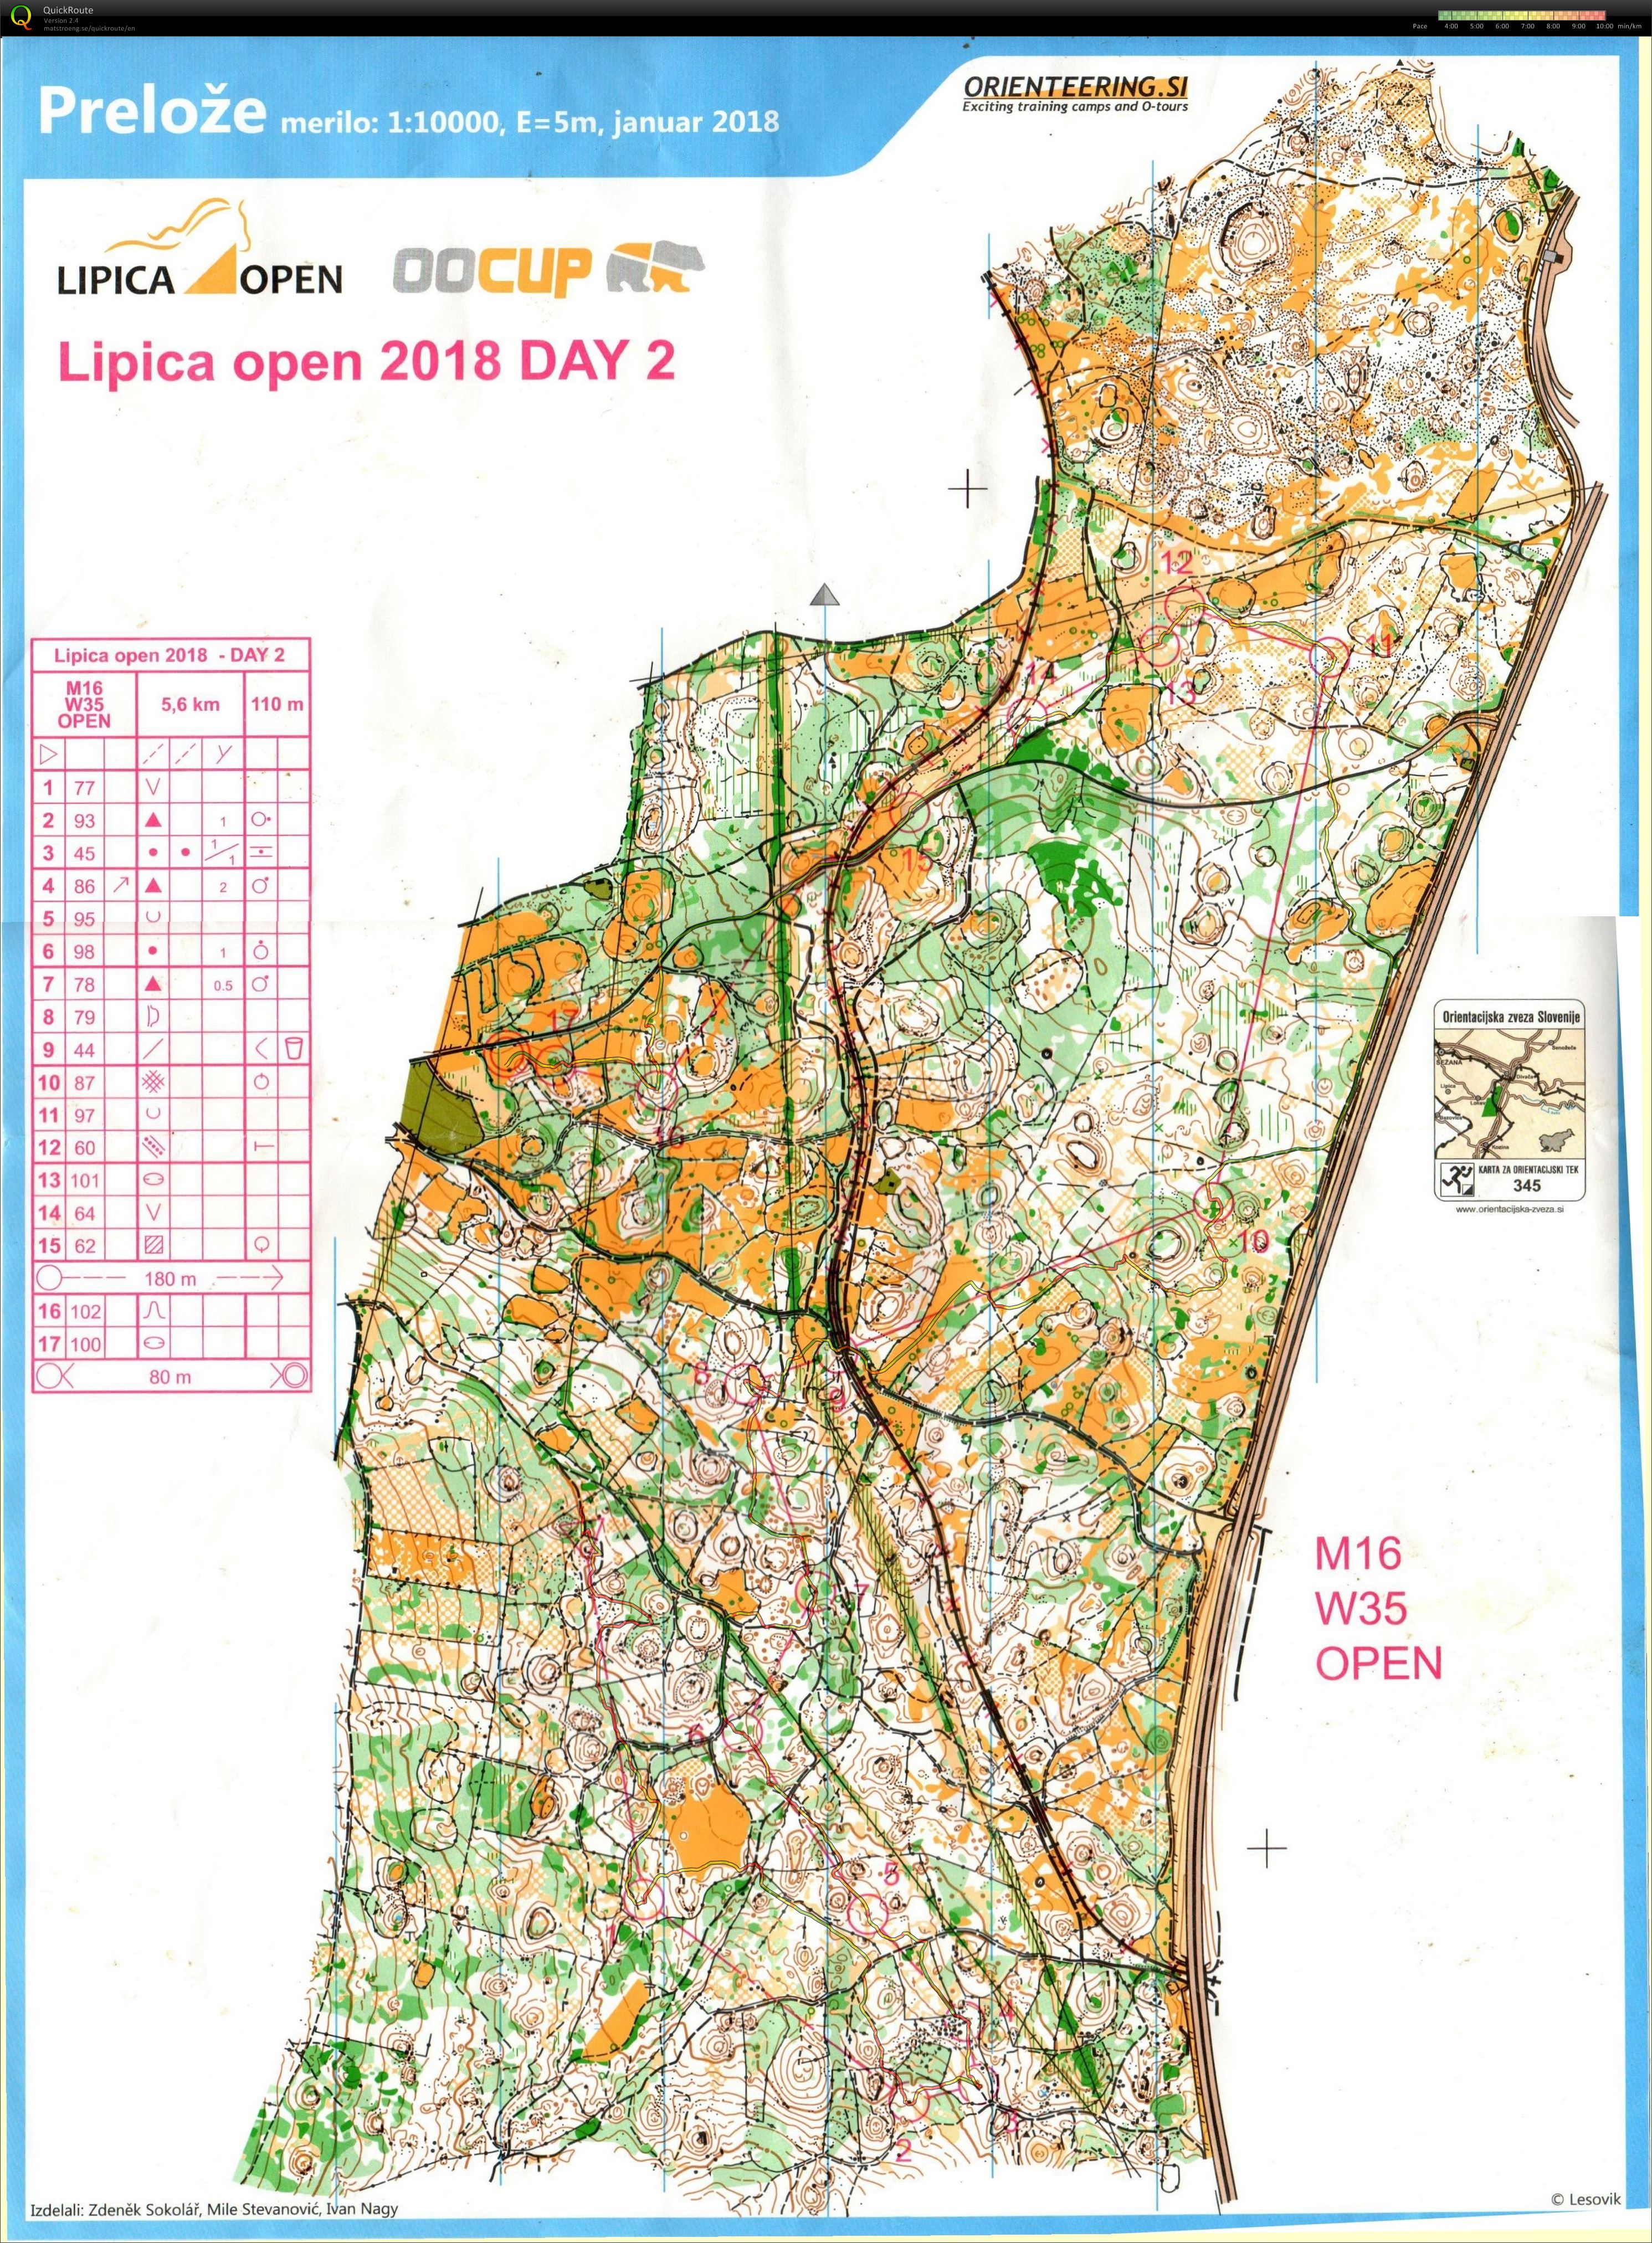 Lipica Open 2018 Day 2 (11-03-2018)